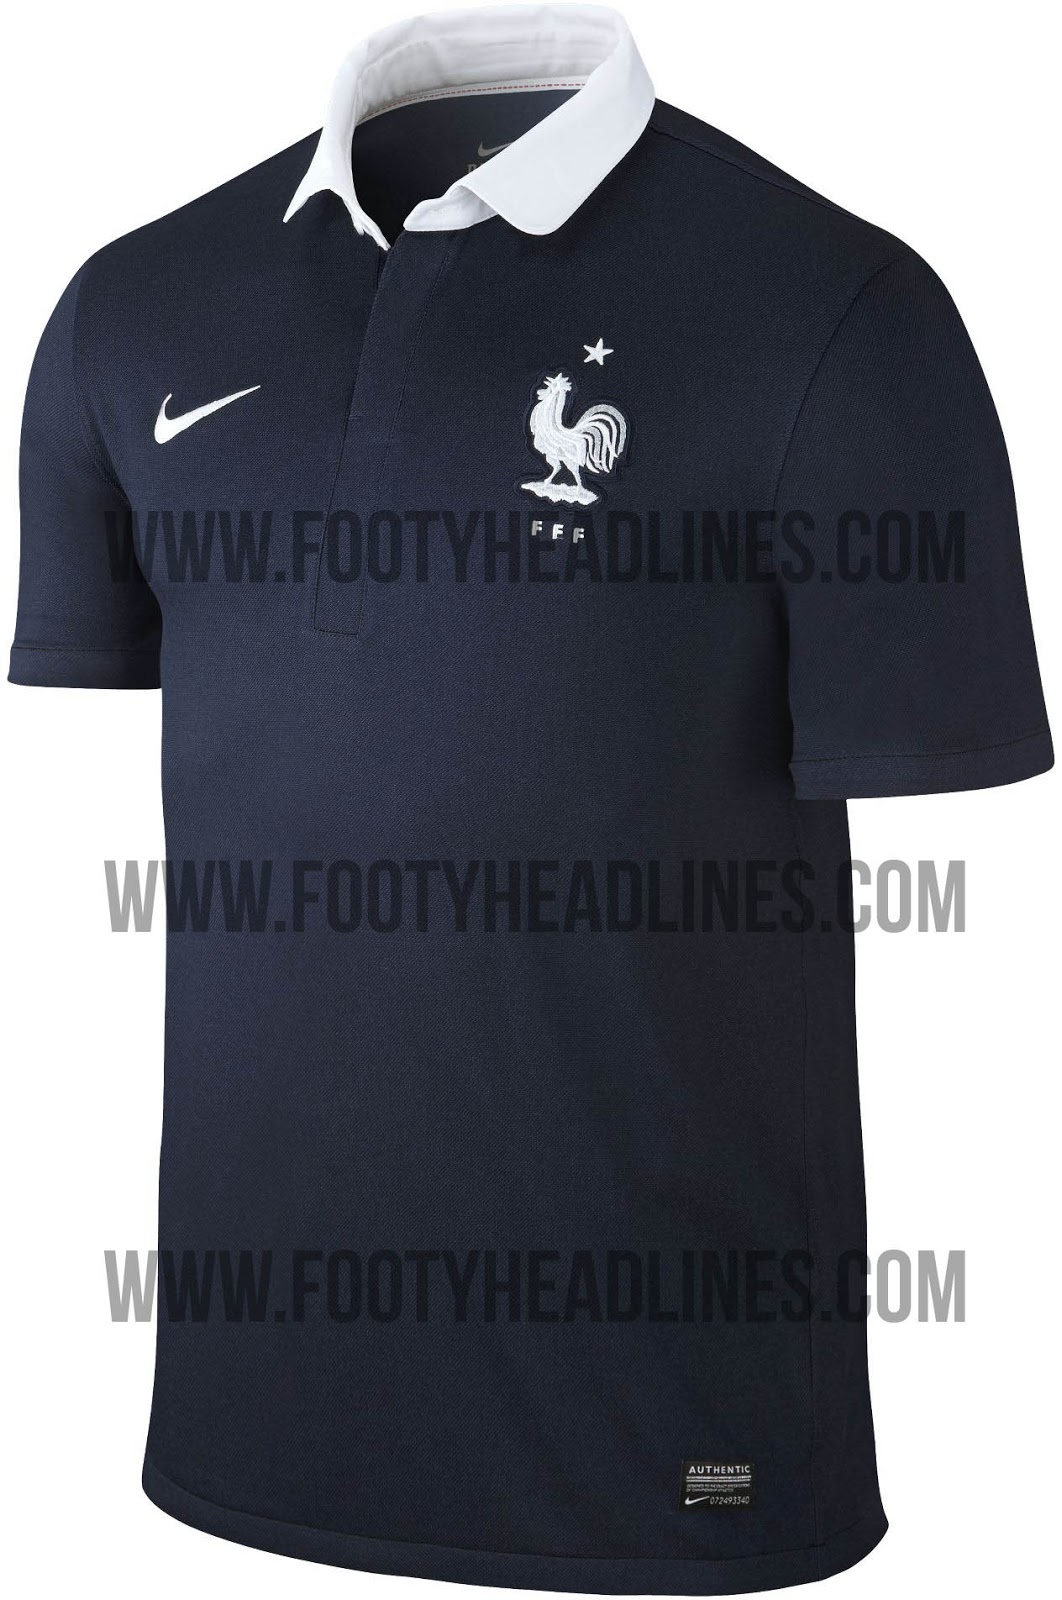 Nike+France+2014+World+Cup+Kit+Front.jpg